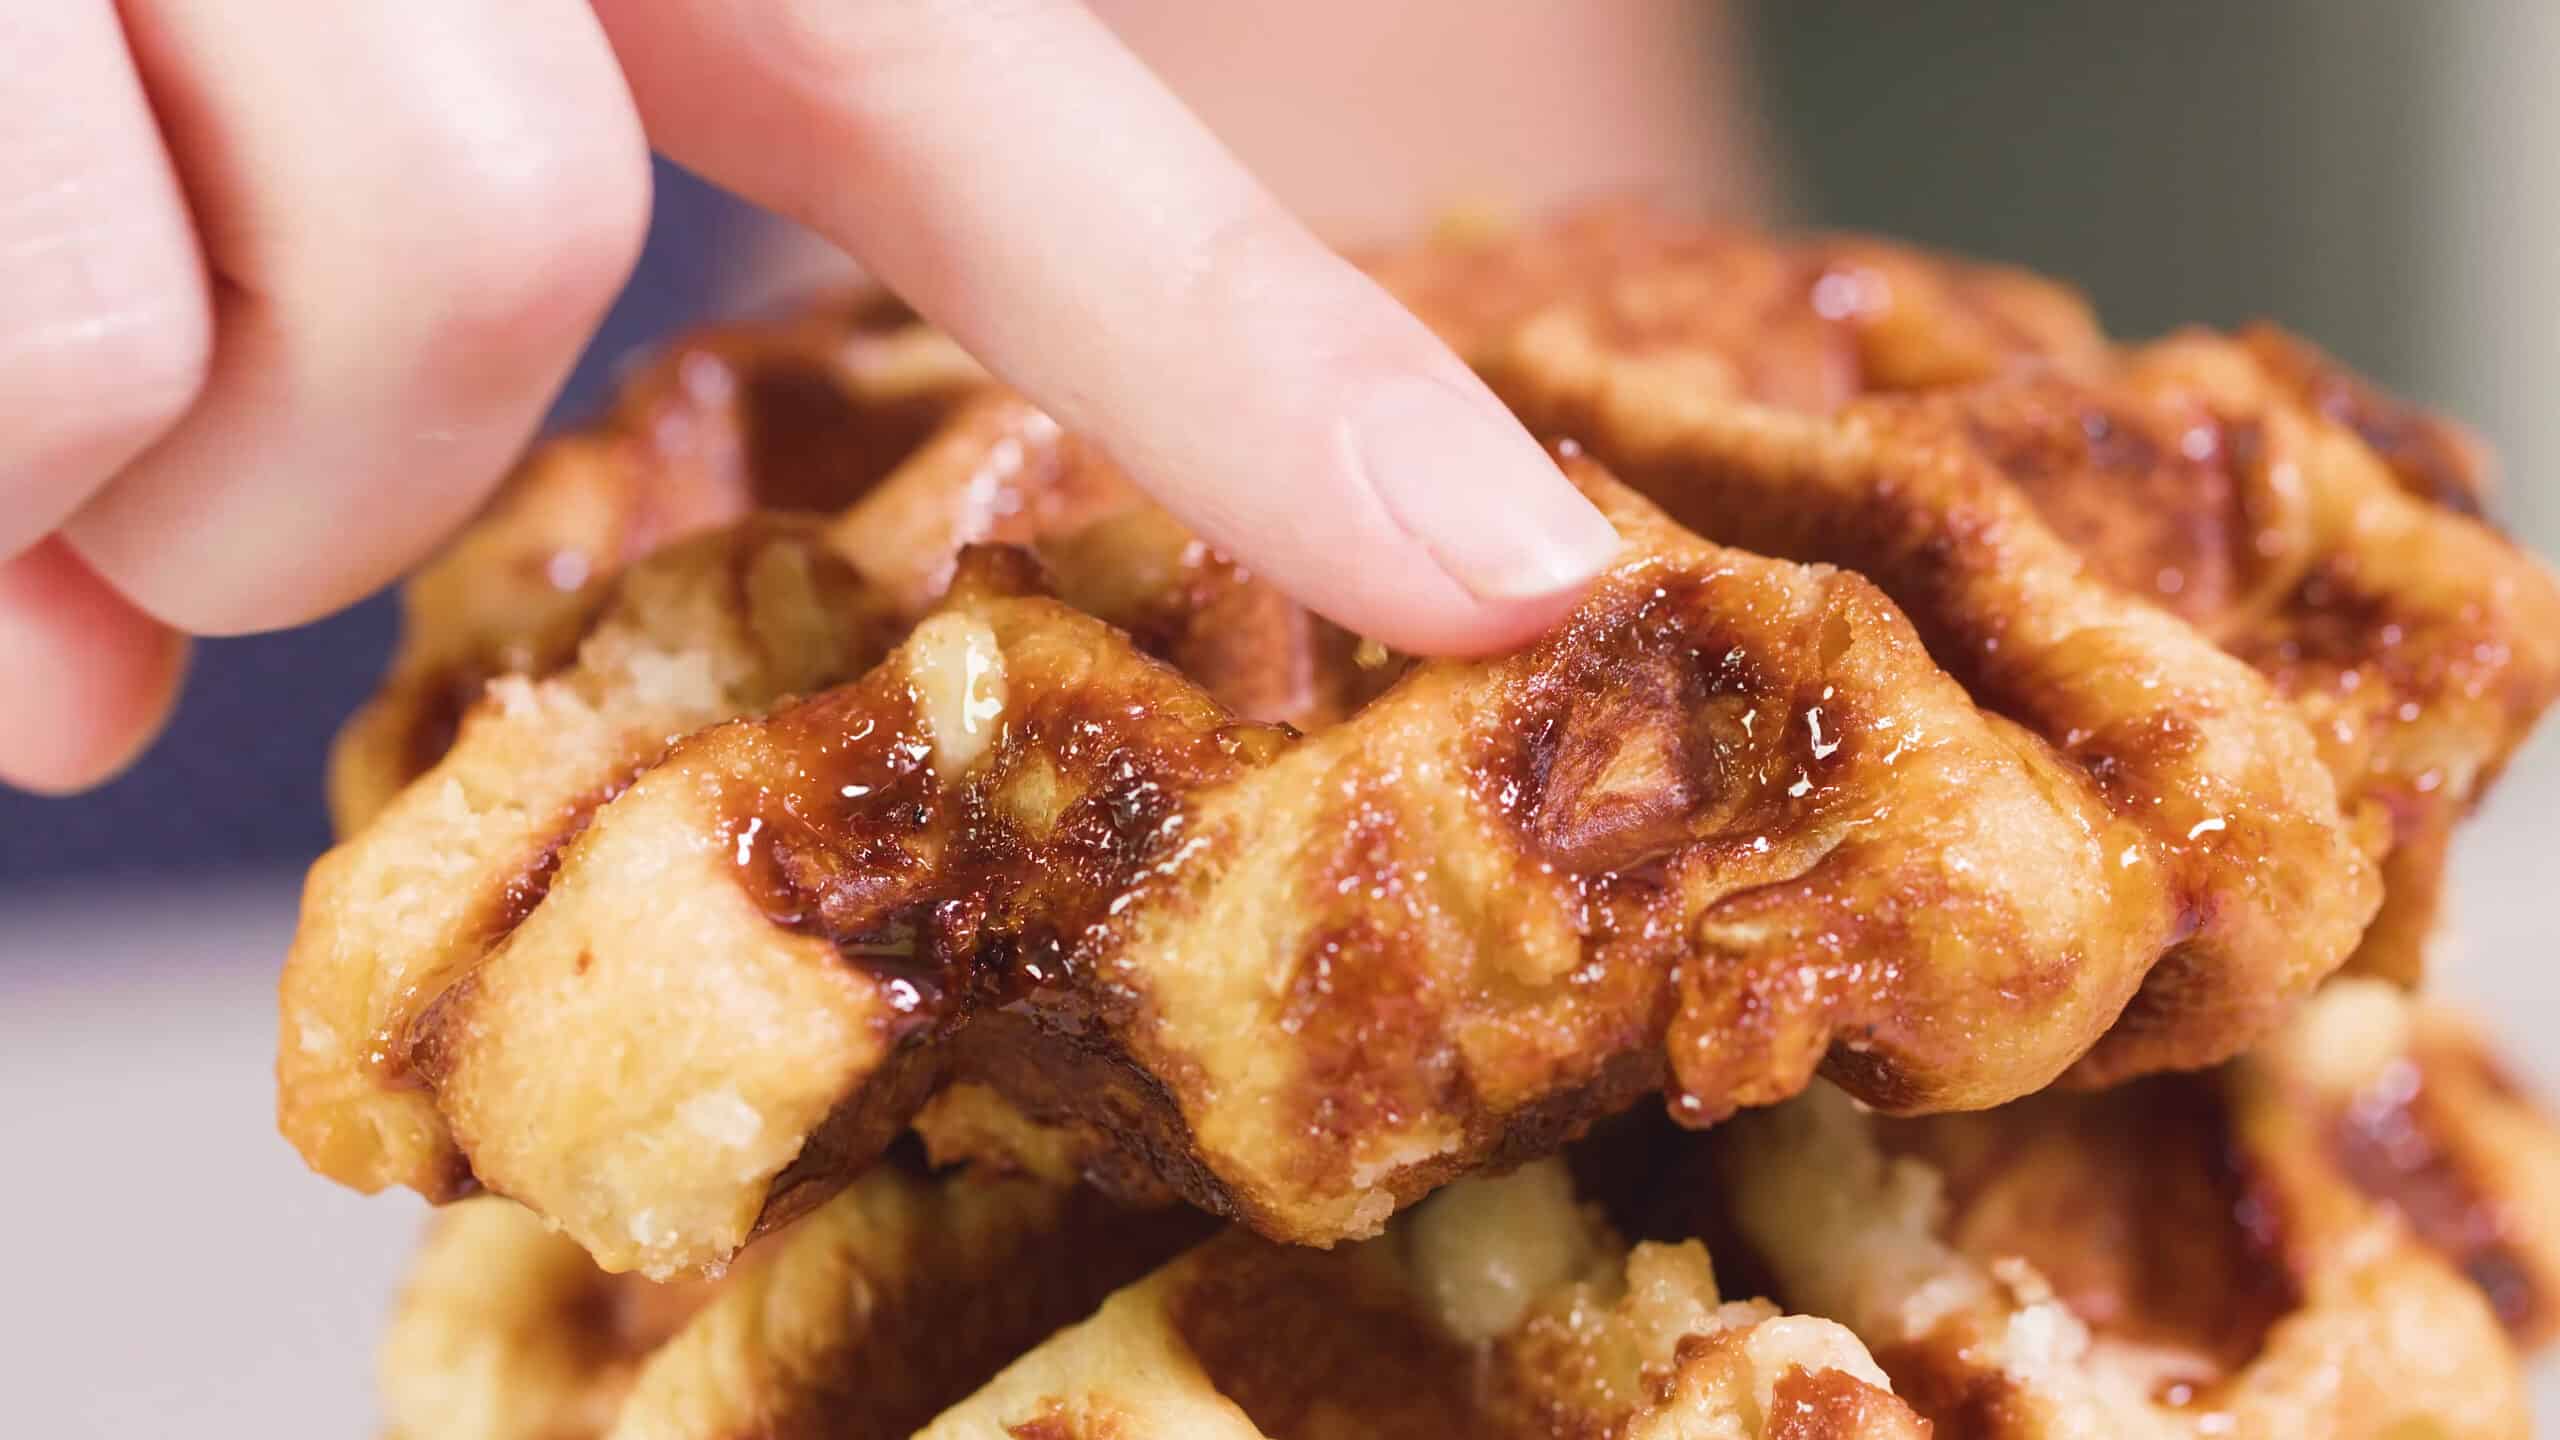 A close-up view of how the pearl sugar beads caramelize and integrate into the batter after cooking.